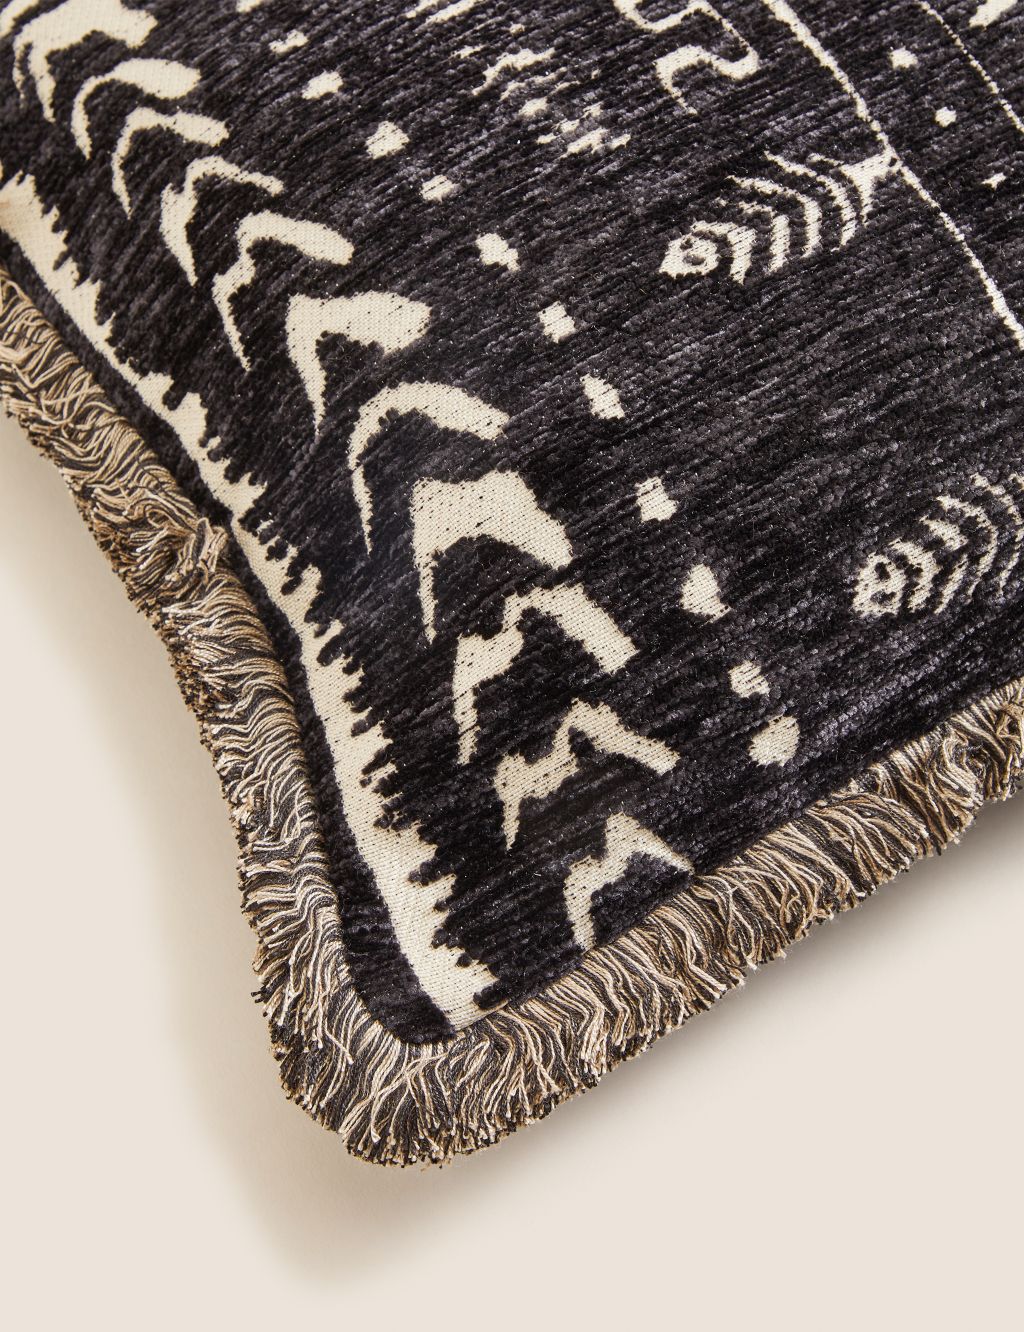 Chenille Patterned Bolster Cushion image 6